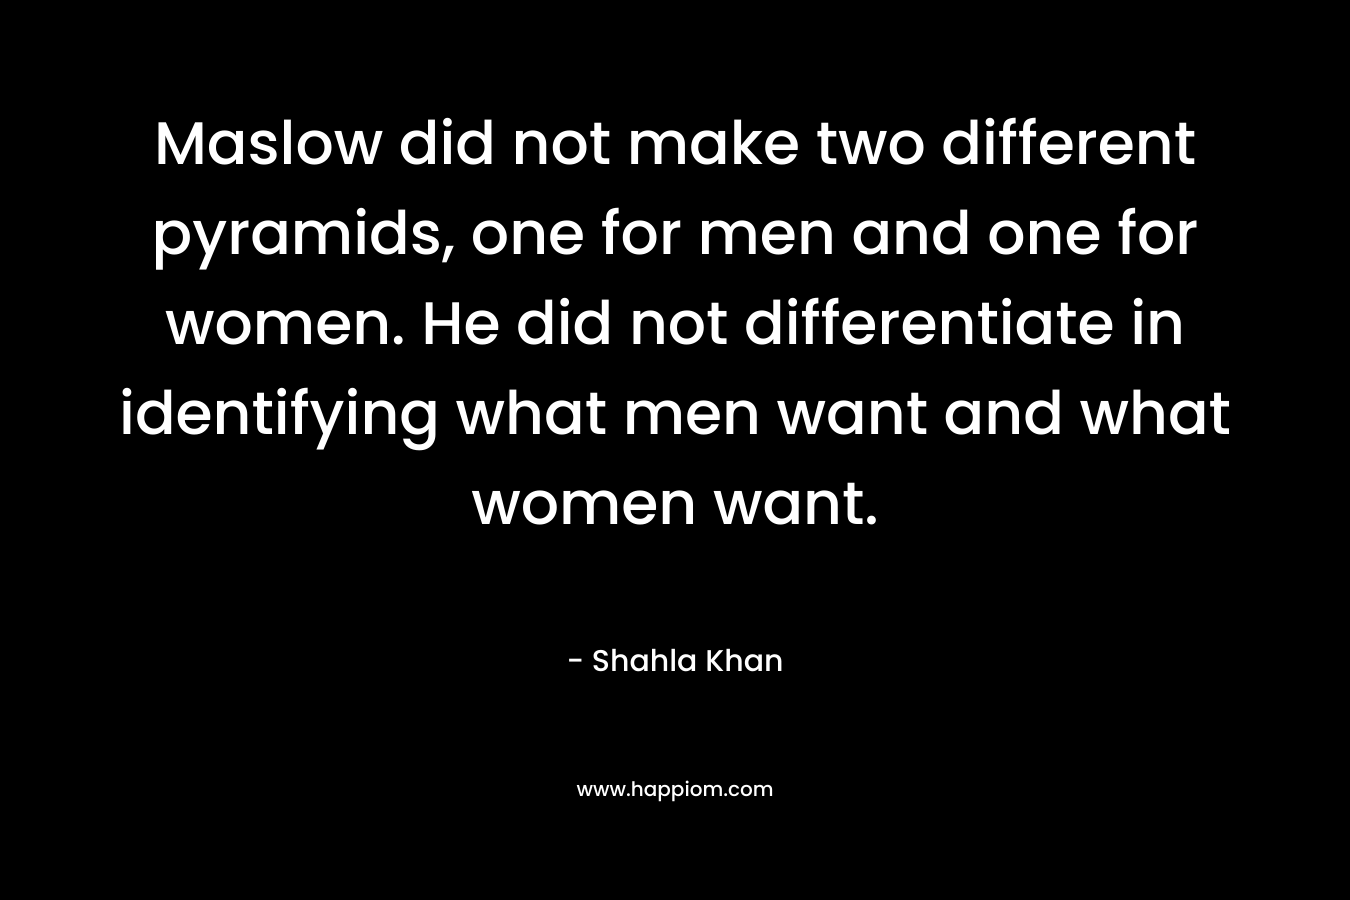 Maslow did not make two different pyramids, one for men and one for women. He did not differentiate in identifying what men want and what women want. – Shahla Khan